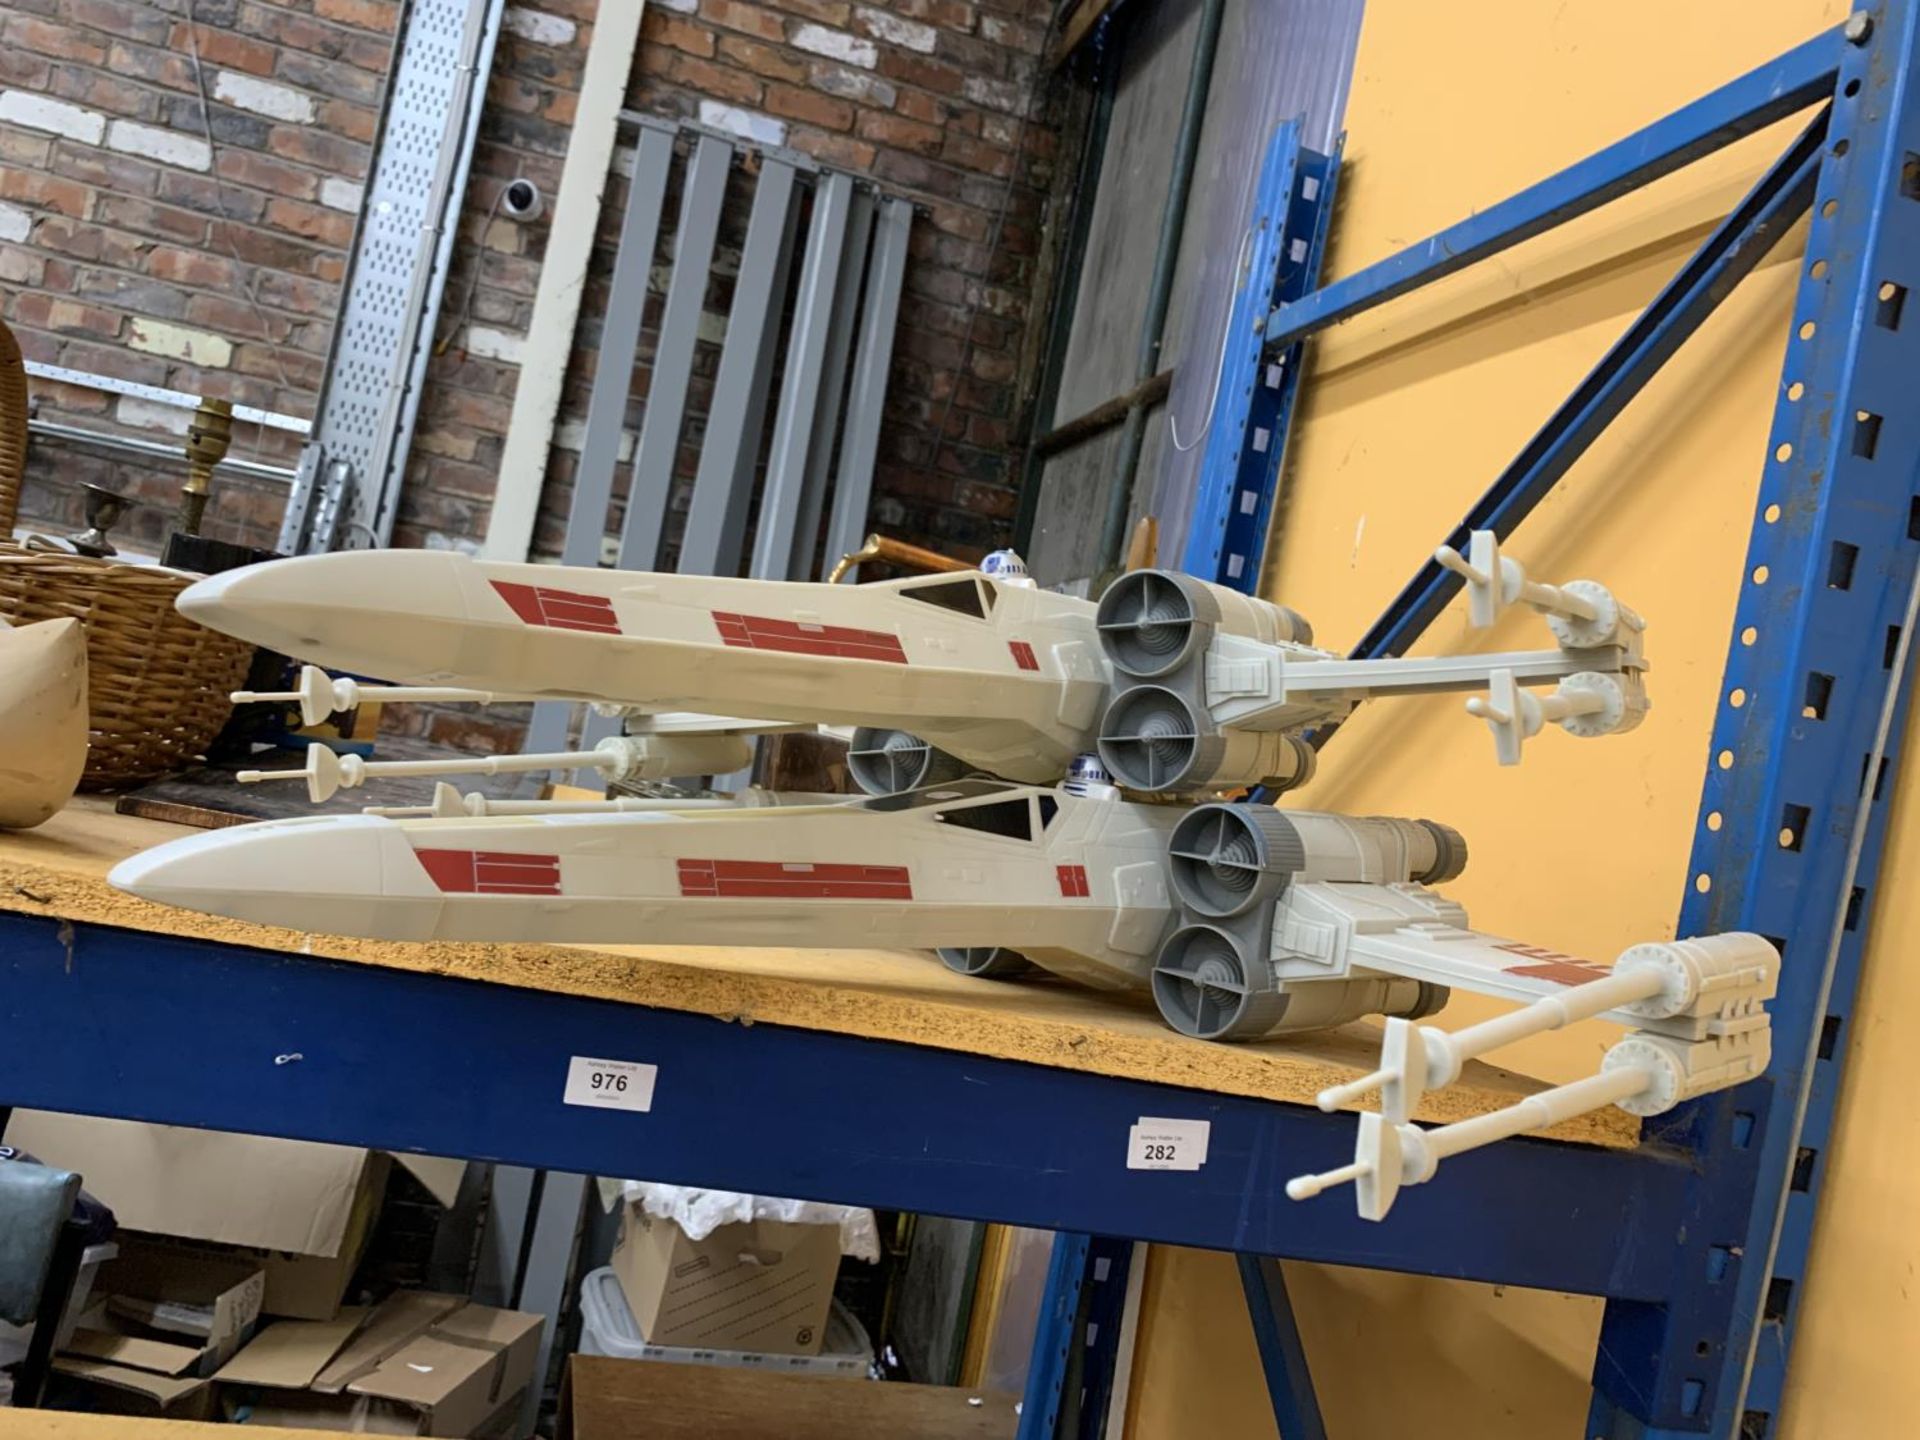 TWO STAR WARS X-WING STARFIGHTERS